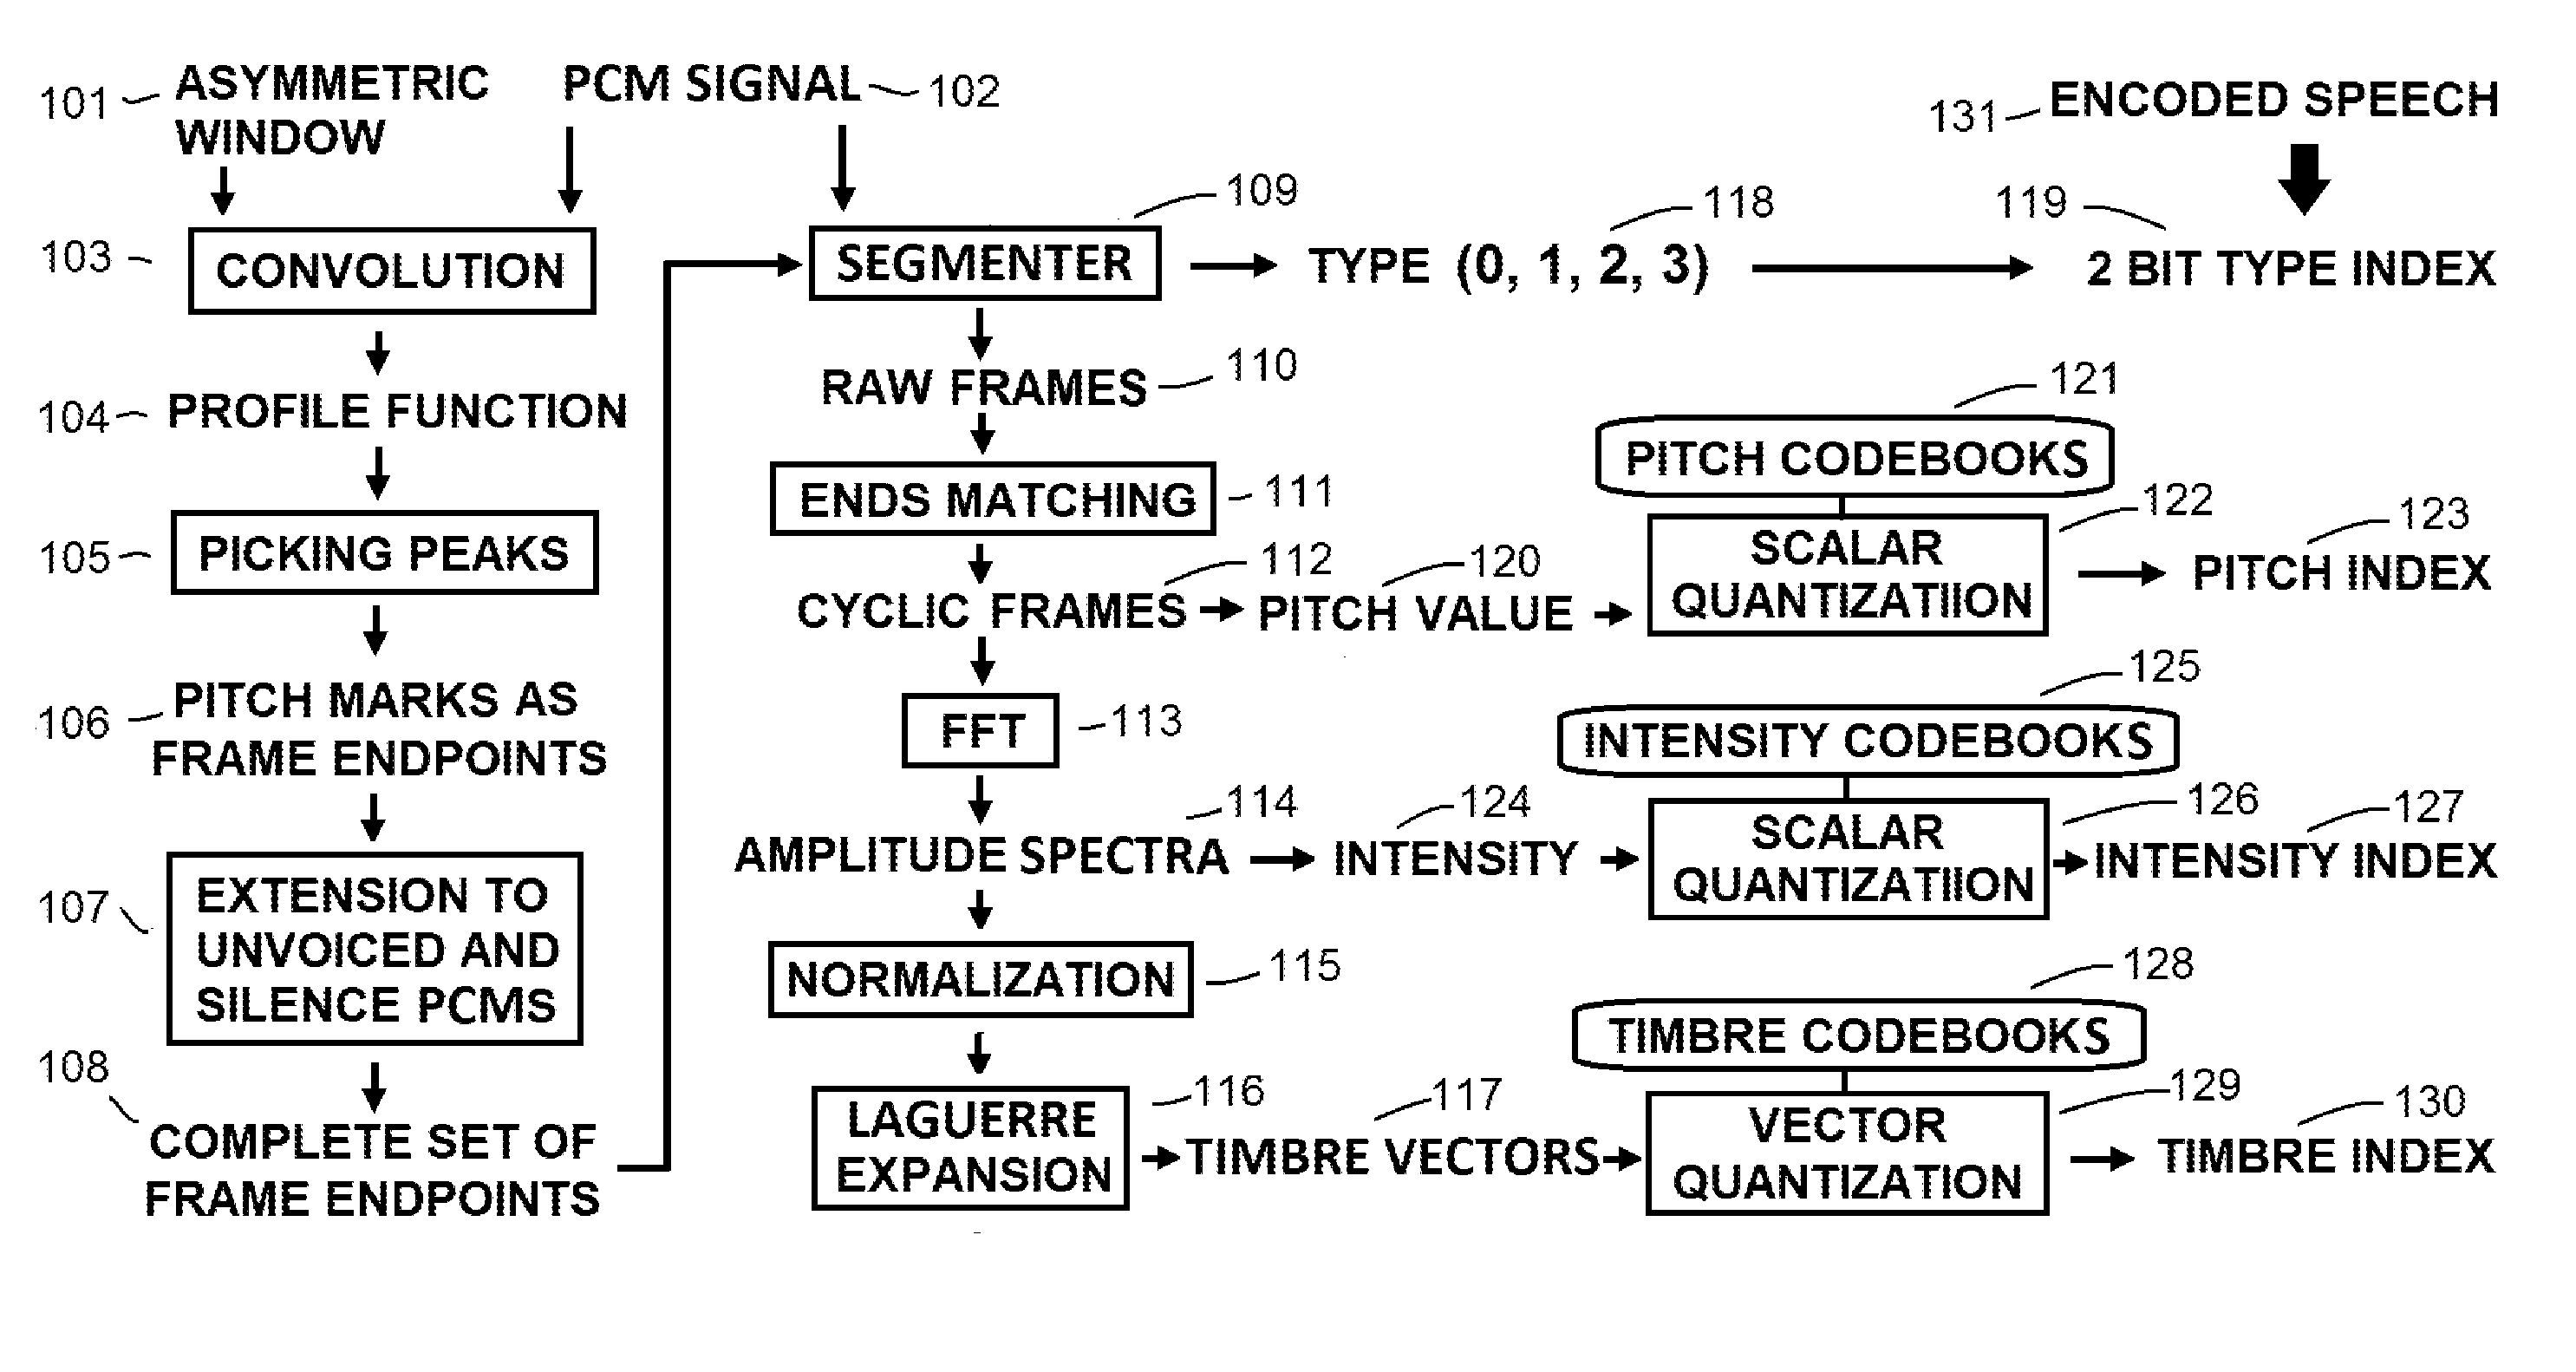 Pitch Synchronous Speech Coding Based on Timbre Vectors